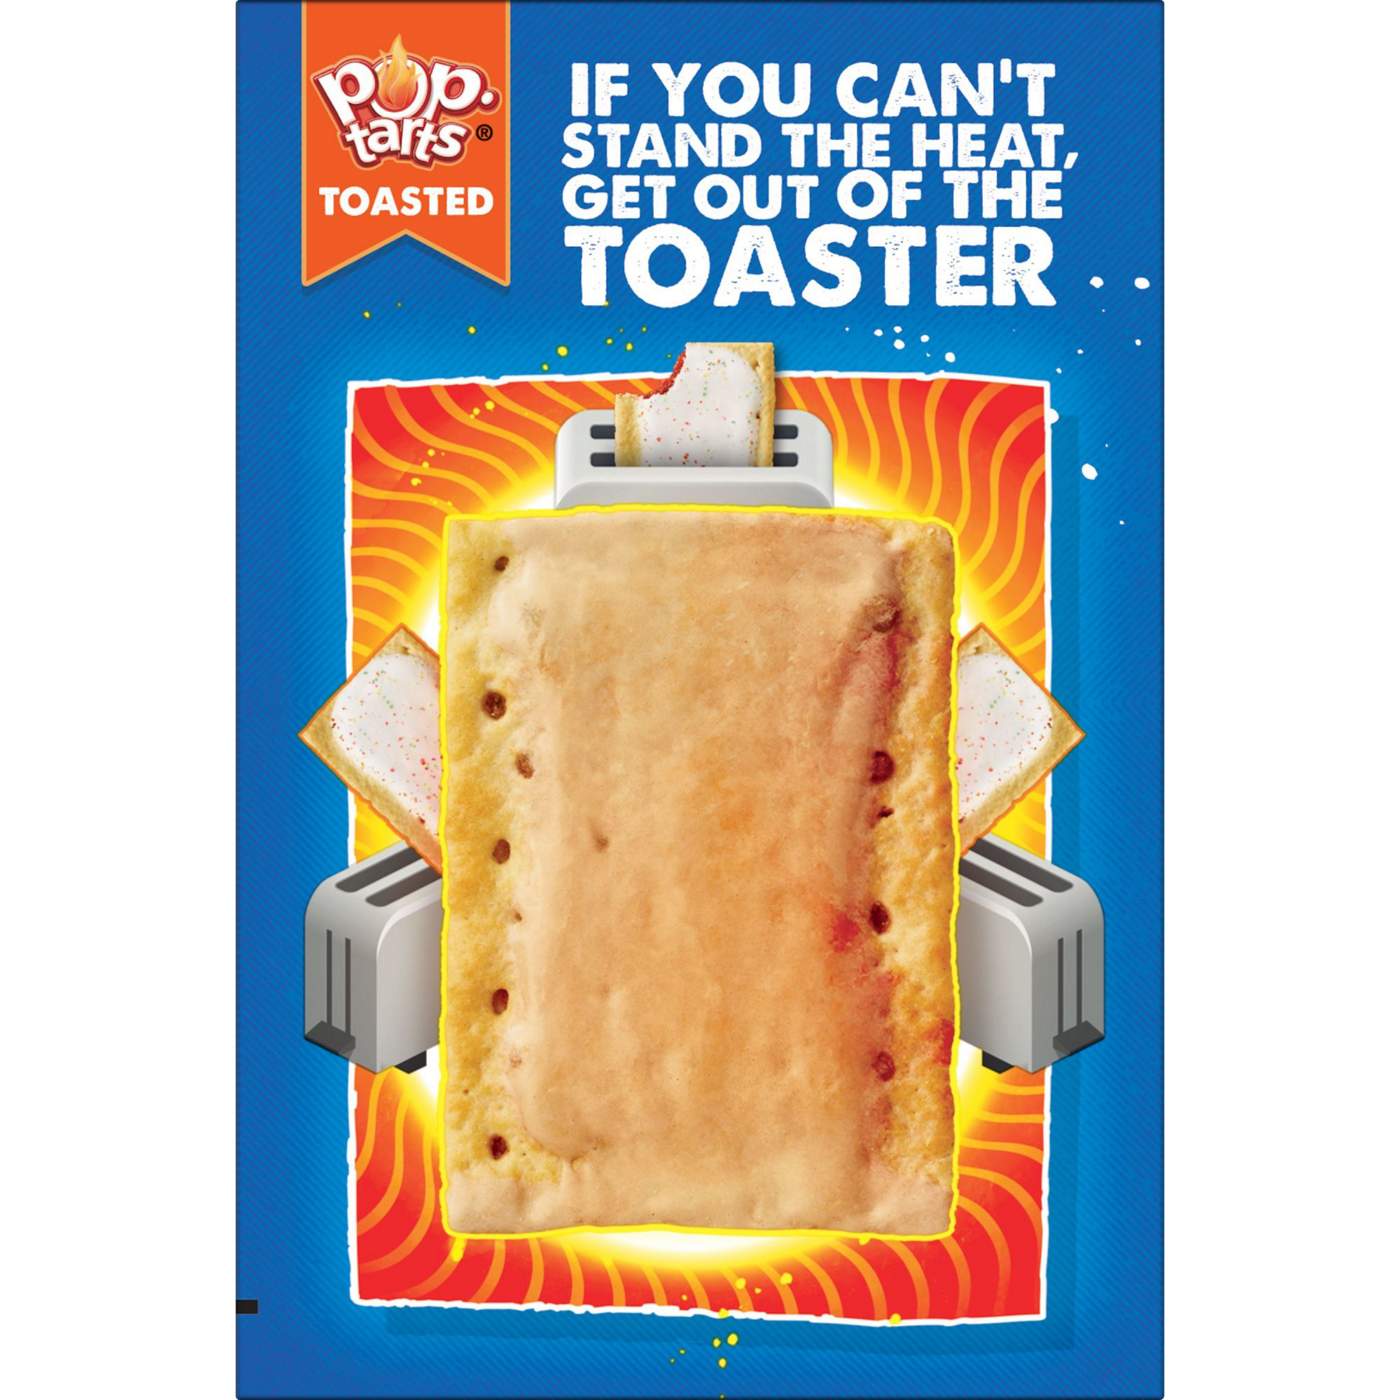 Pop-Tarts Frosted Chocolate Fudge Toaster Pastries; image 2 of 7